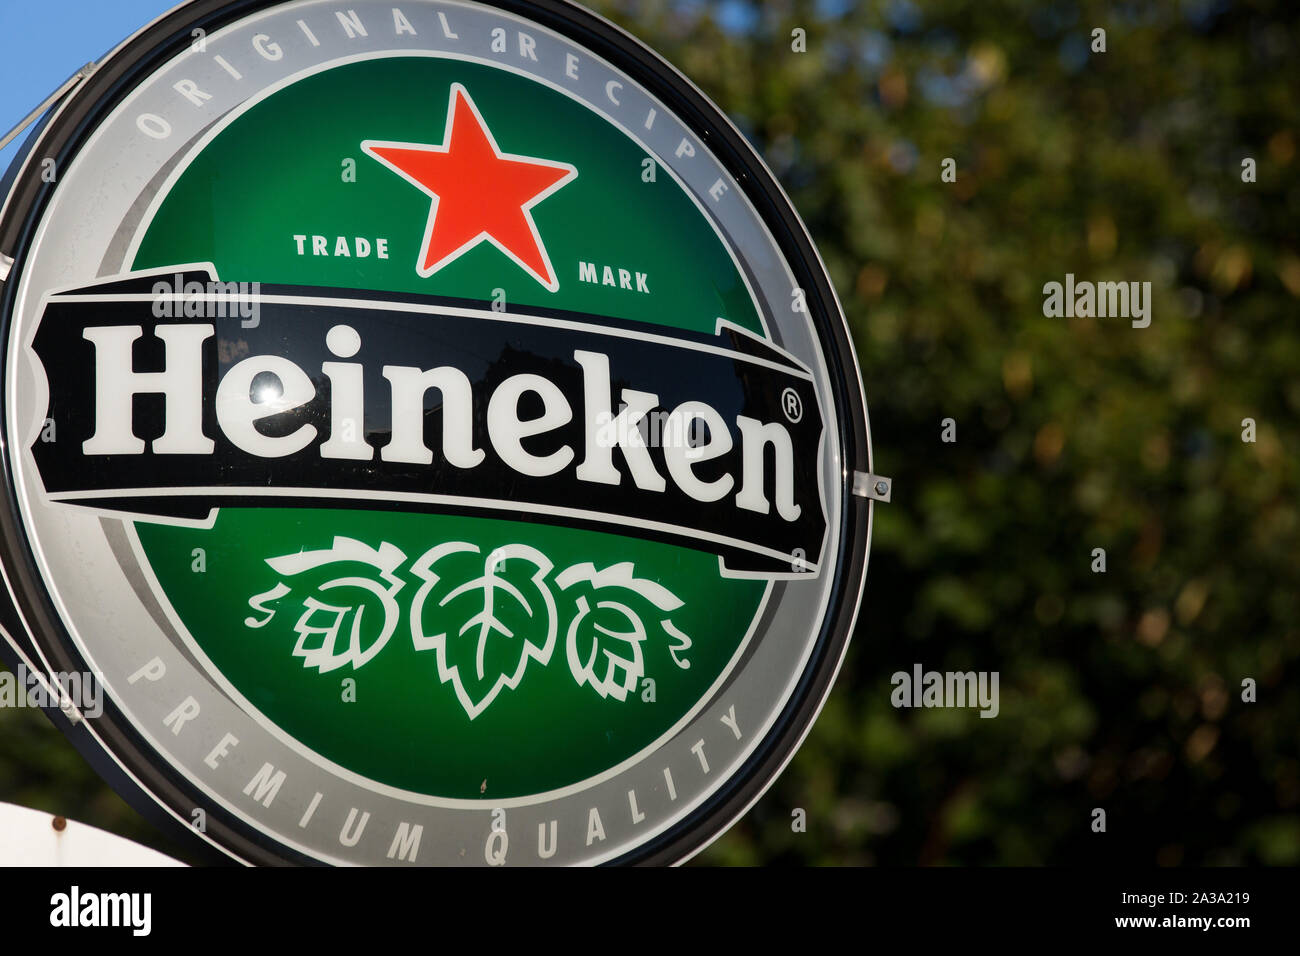 Heineken Logo High Resolution Stock Photography and Images - Alamy